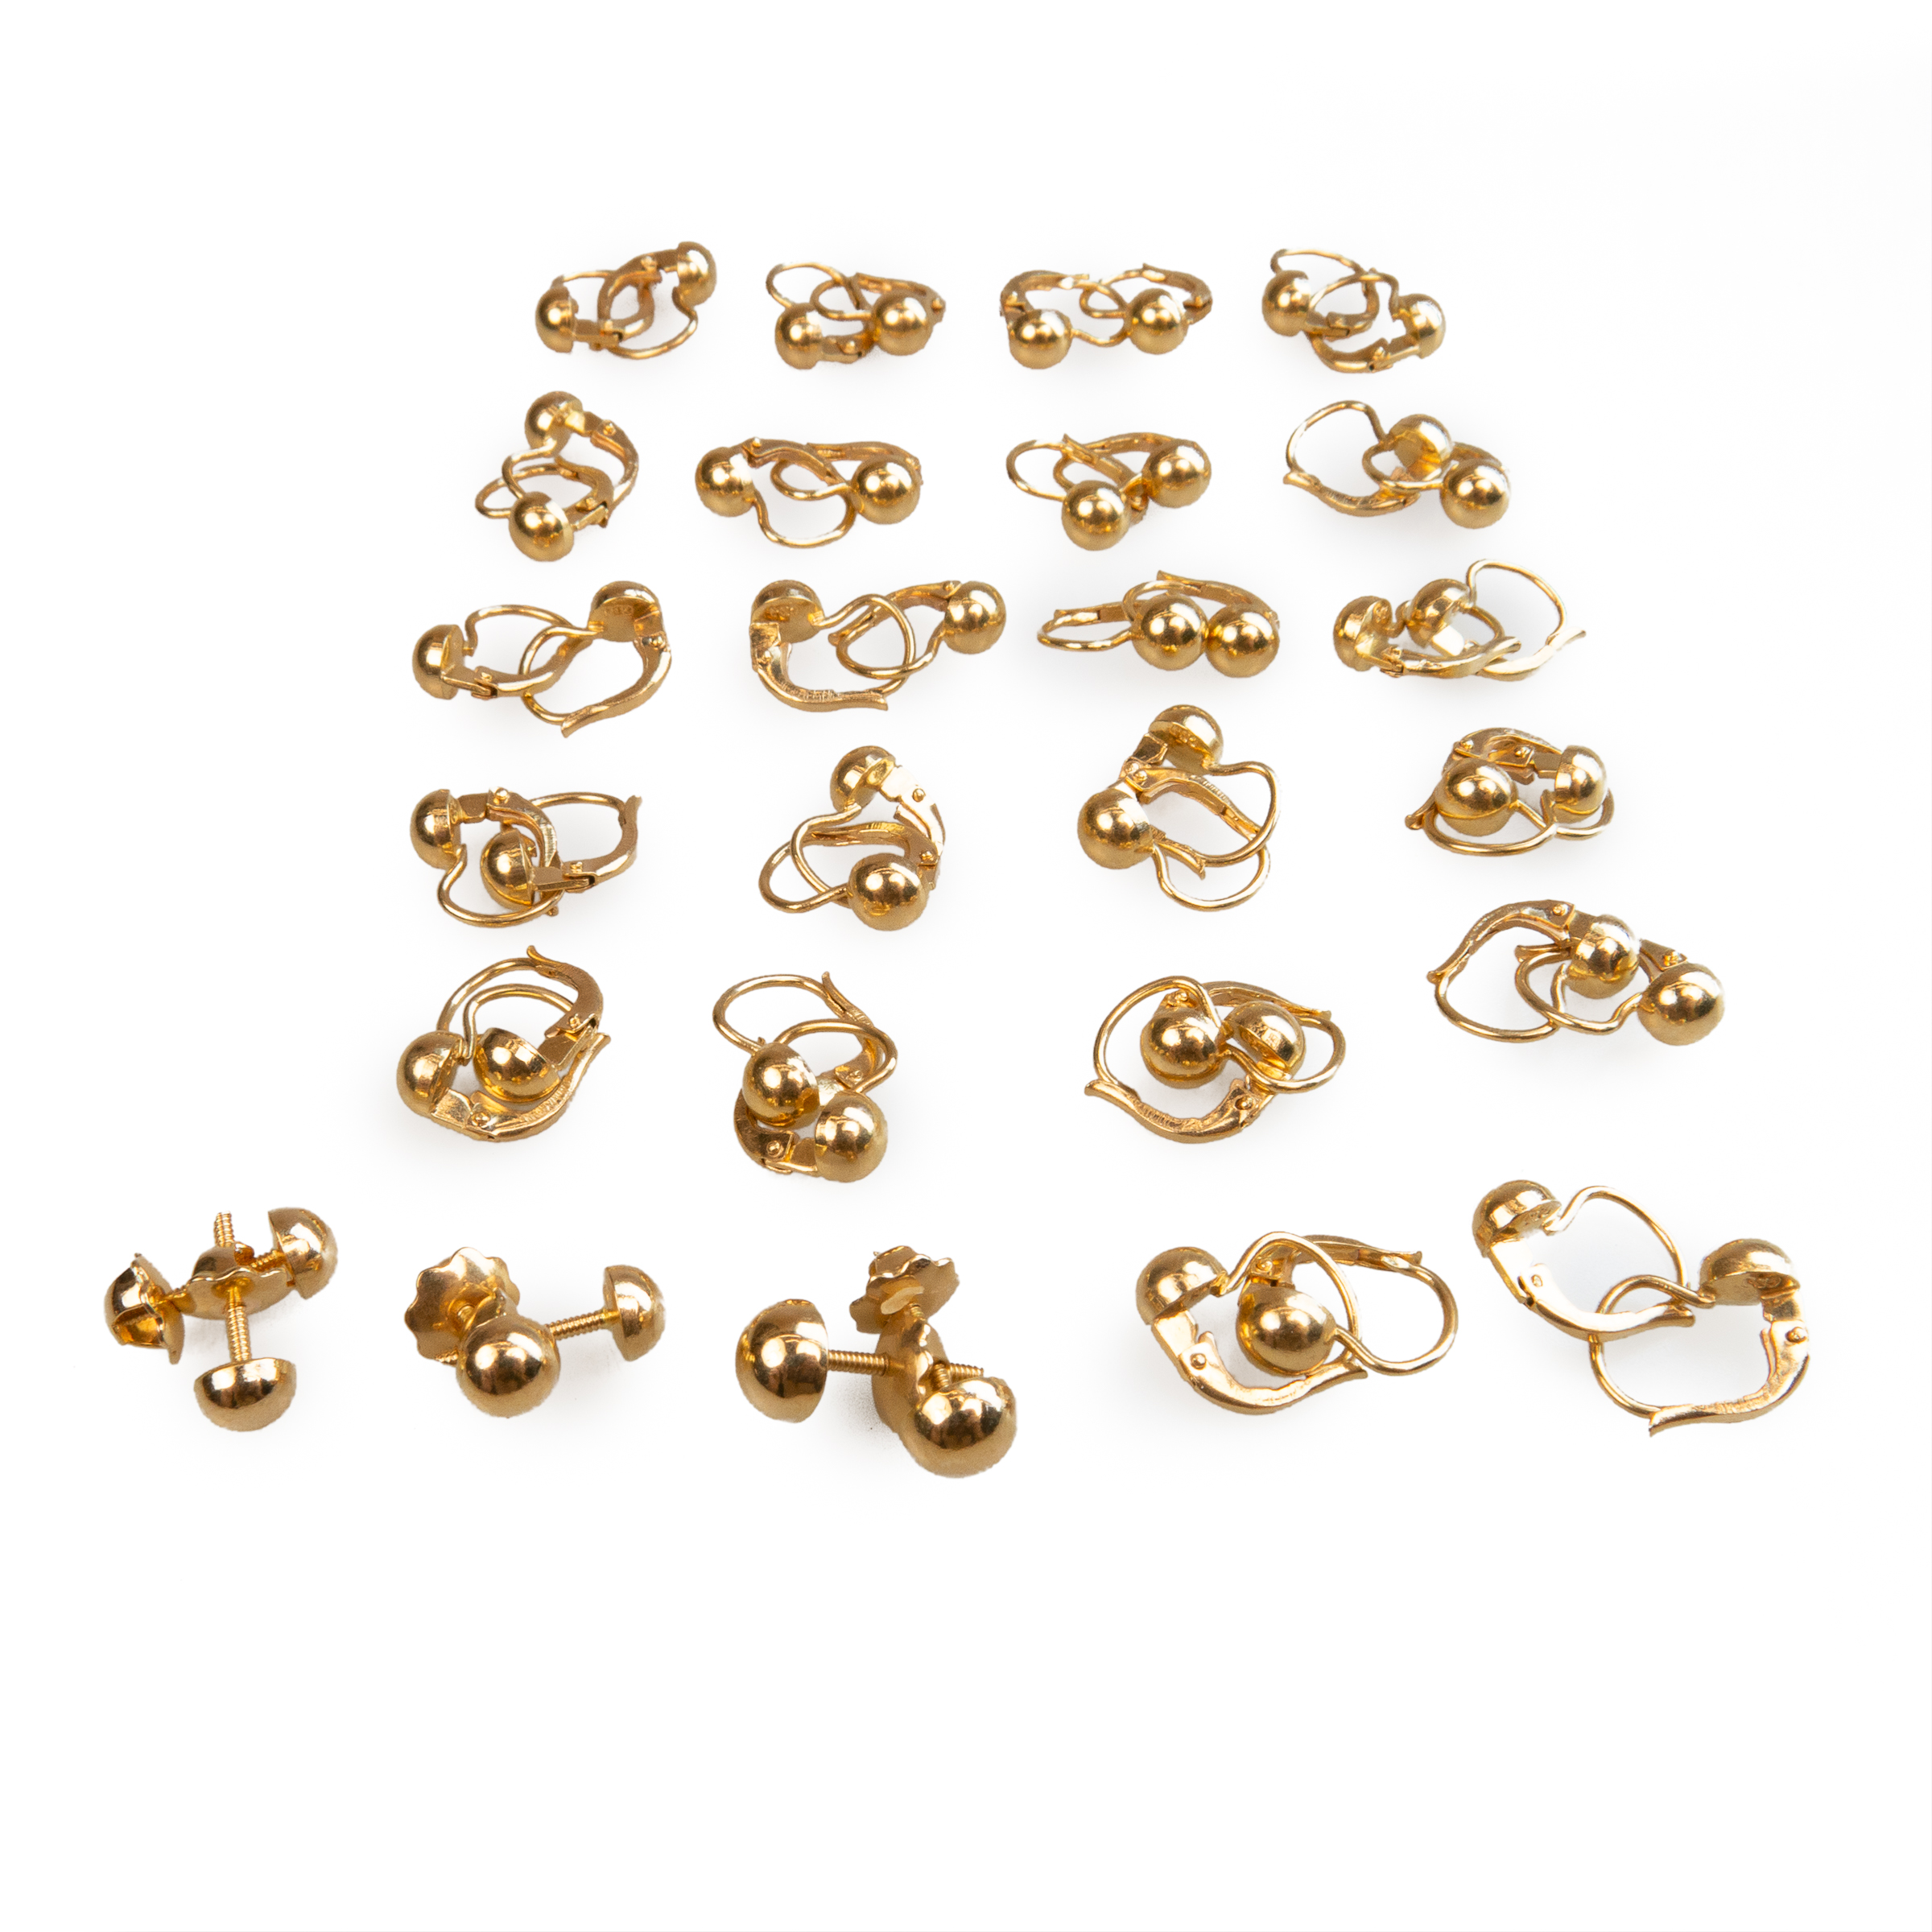 25 x Pairs Of 18k Yellow Gold Earrings